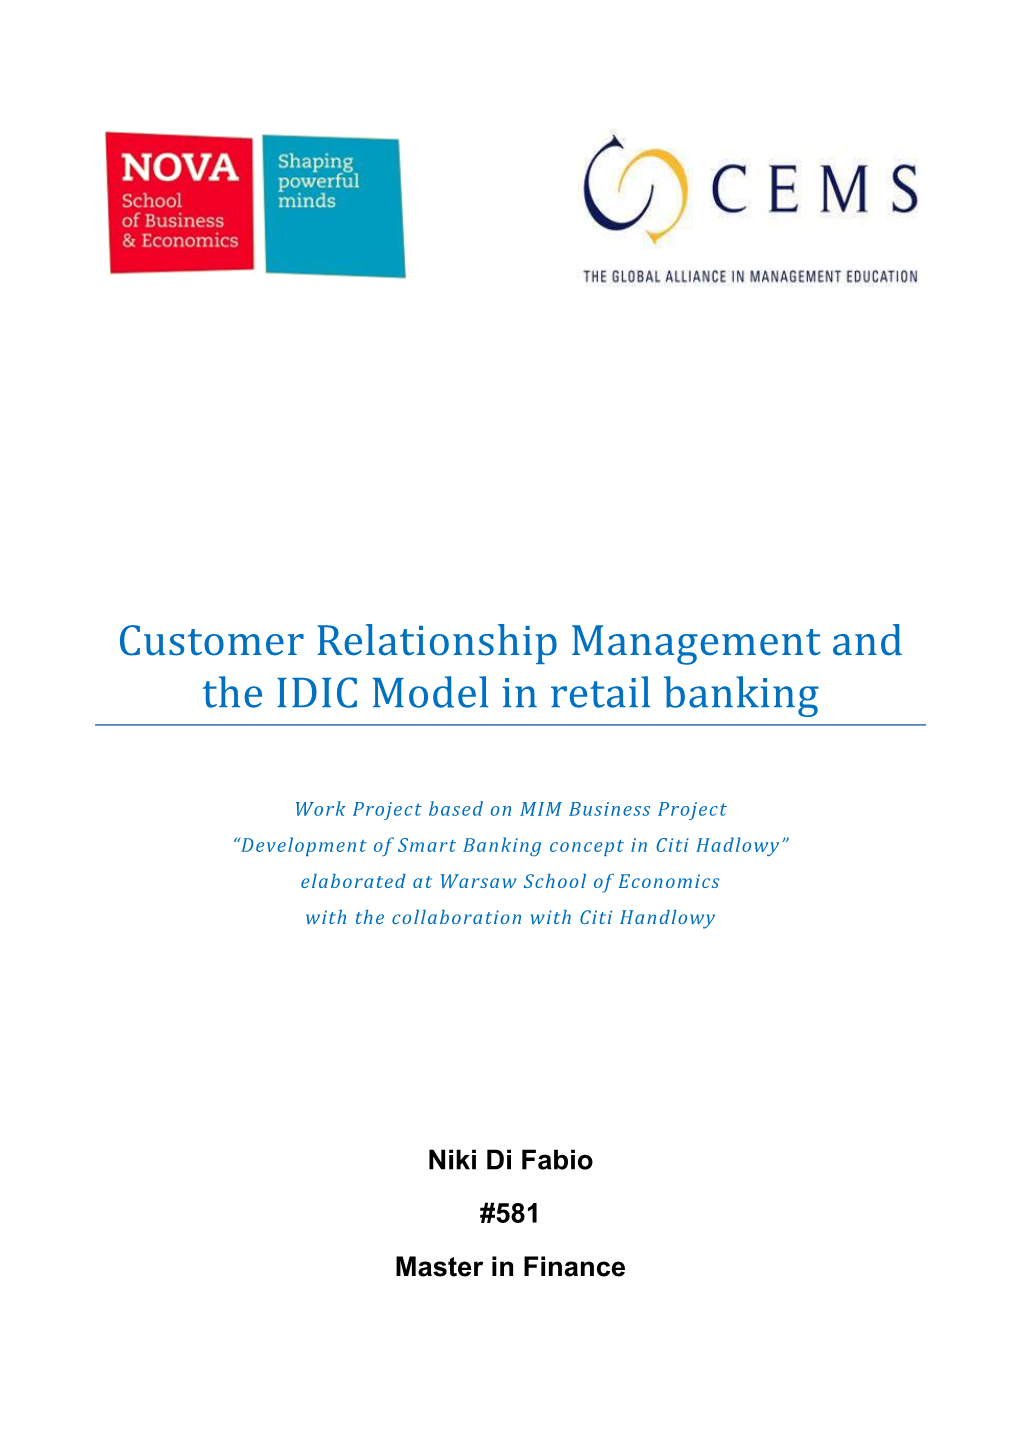 Customer Relationship Management and the IDIC Model in Retail Banking